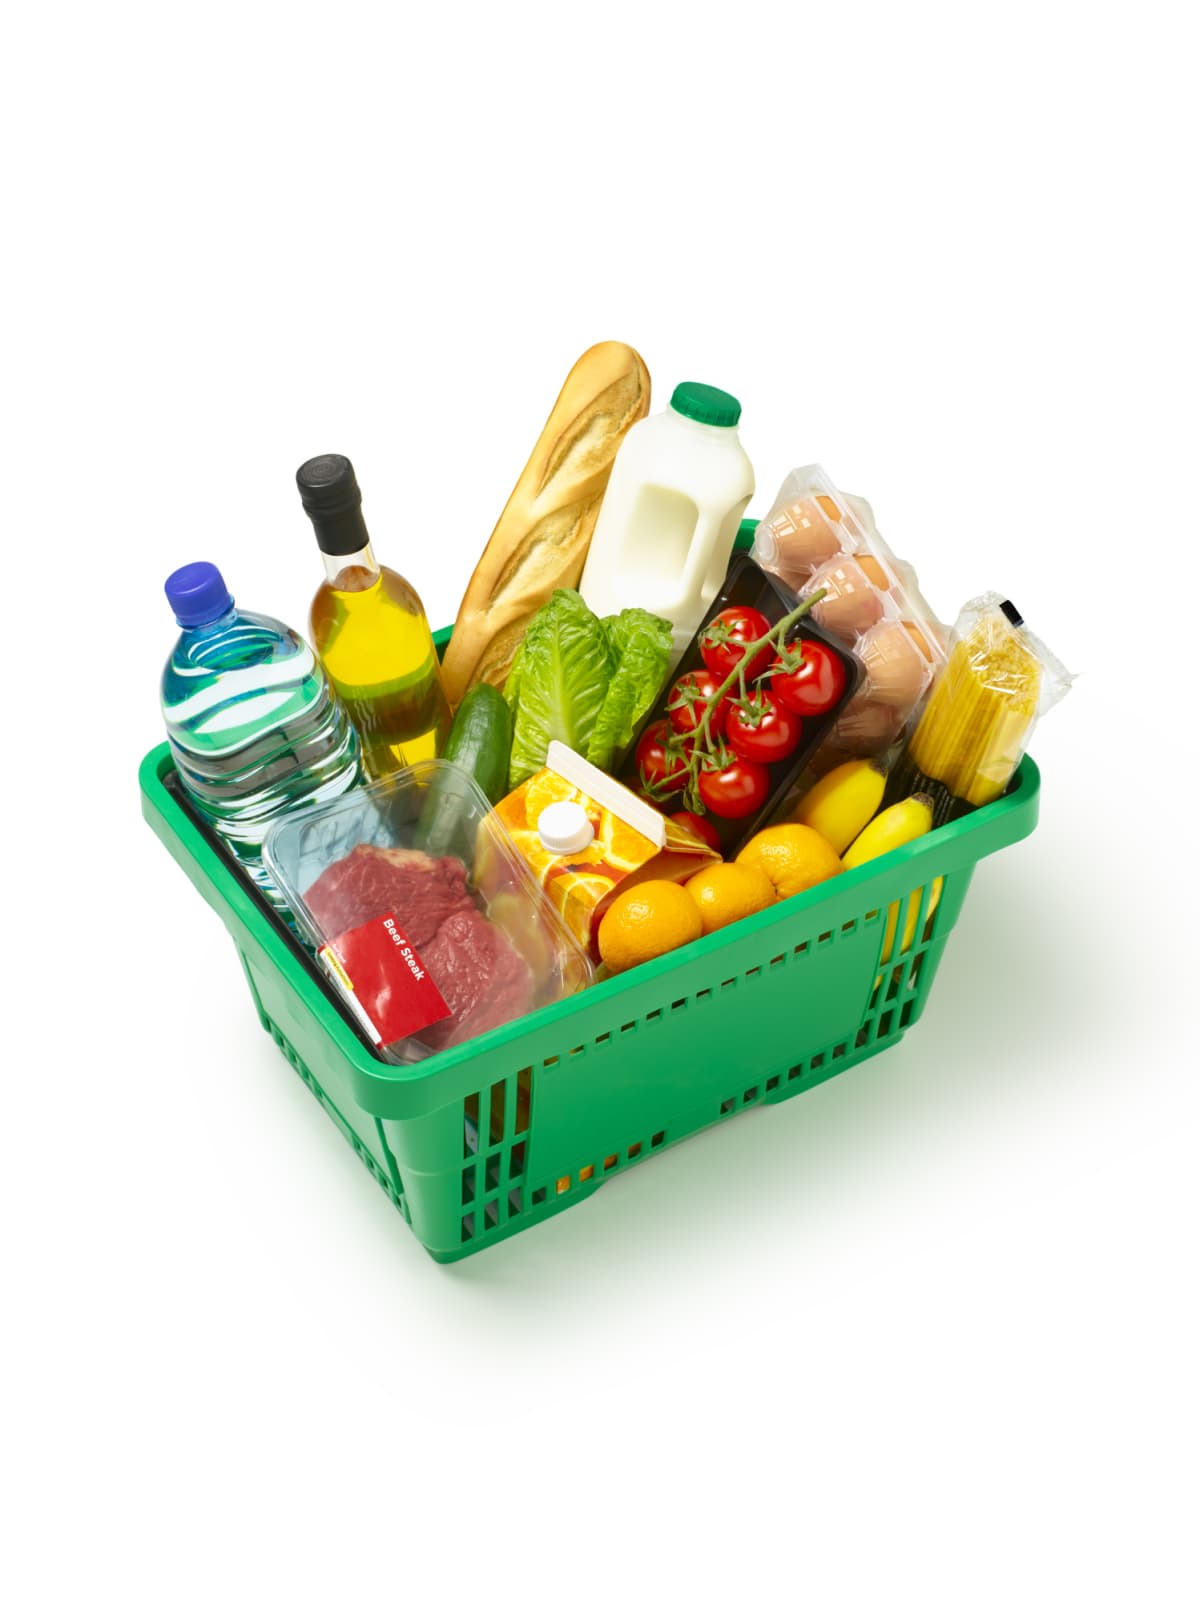 A green basket of assorted groceries against a white background